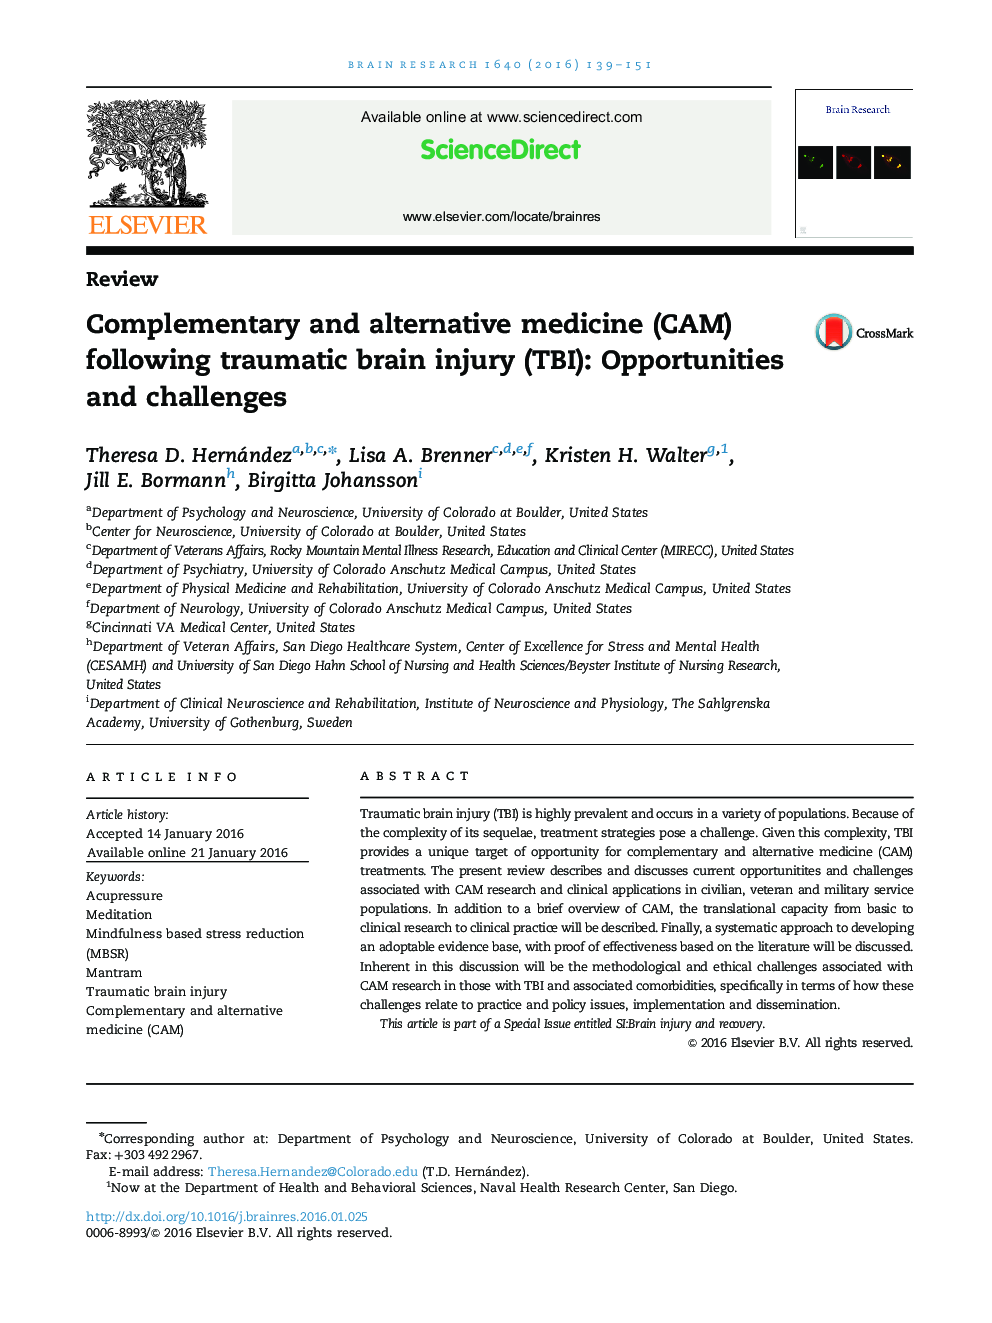 Complementary and alternative medicine (CAM) following traumatic brain injury (TBI): Opportunities and challenges